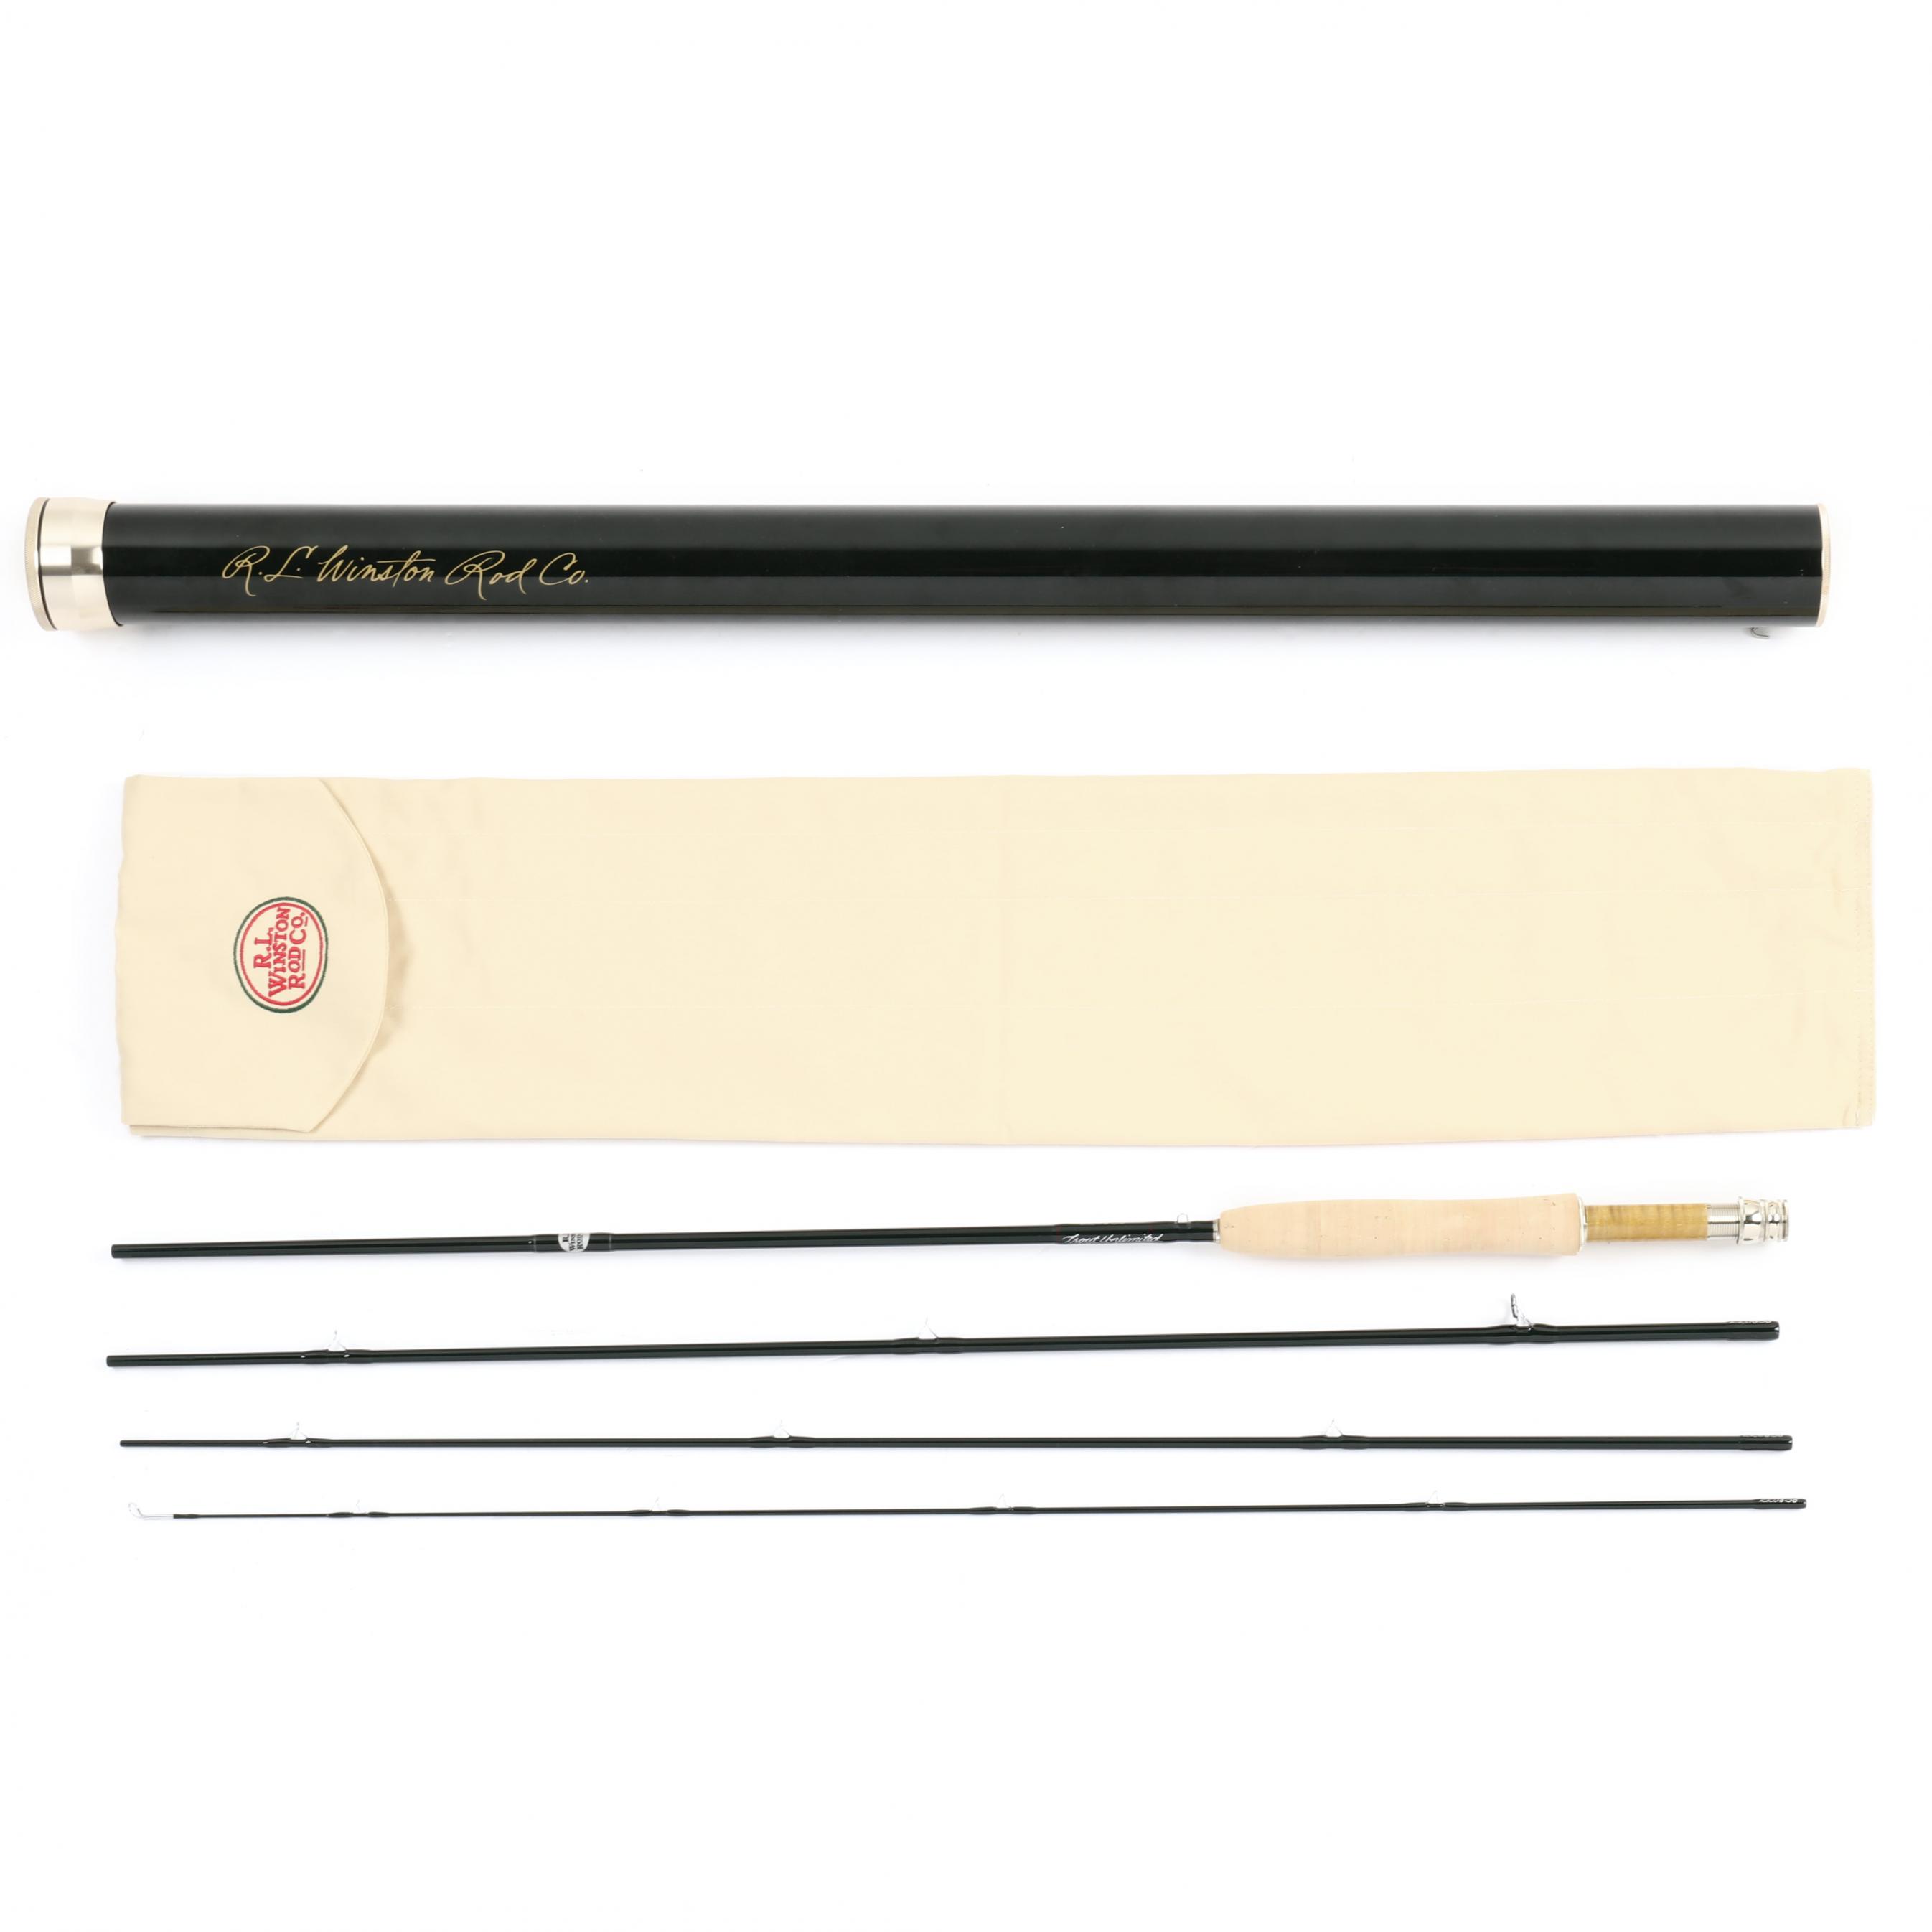 R.L. Winston Pure Fly Rod (Lot 1370 - Fall Sporting Art AuctionOct